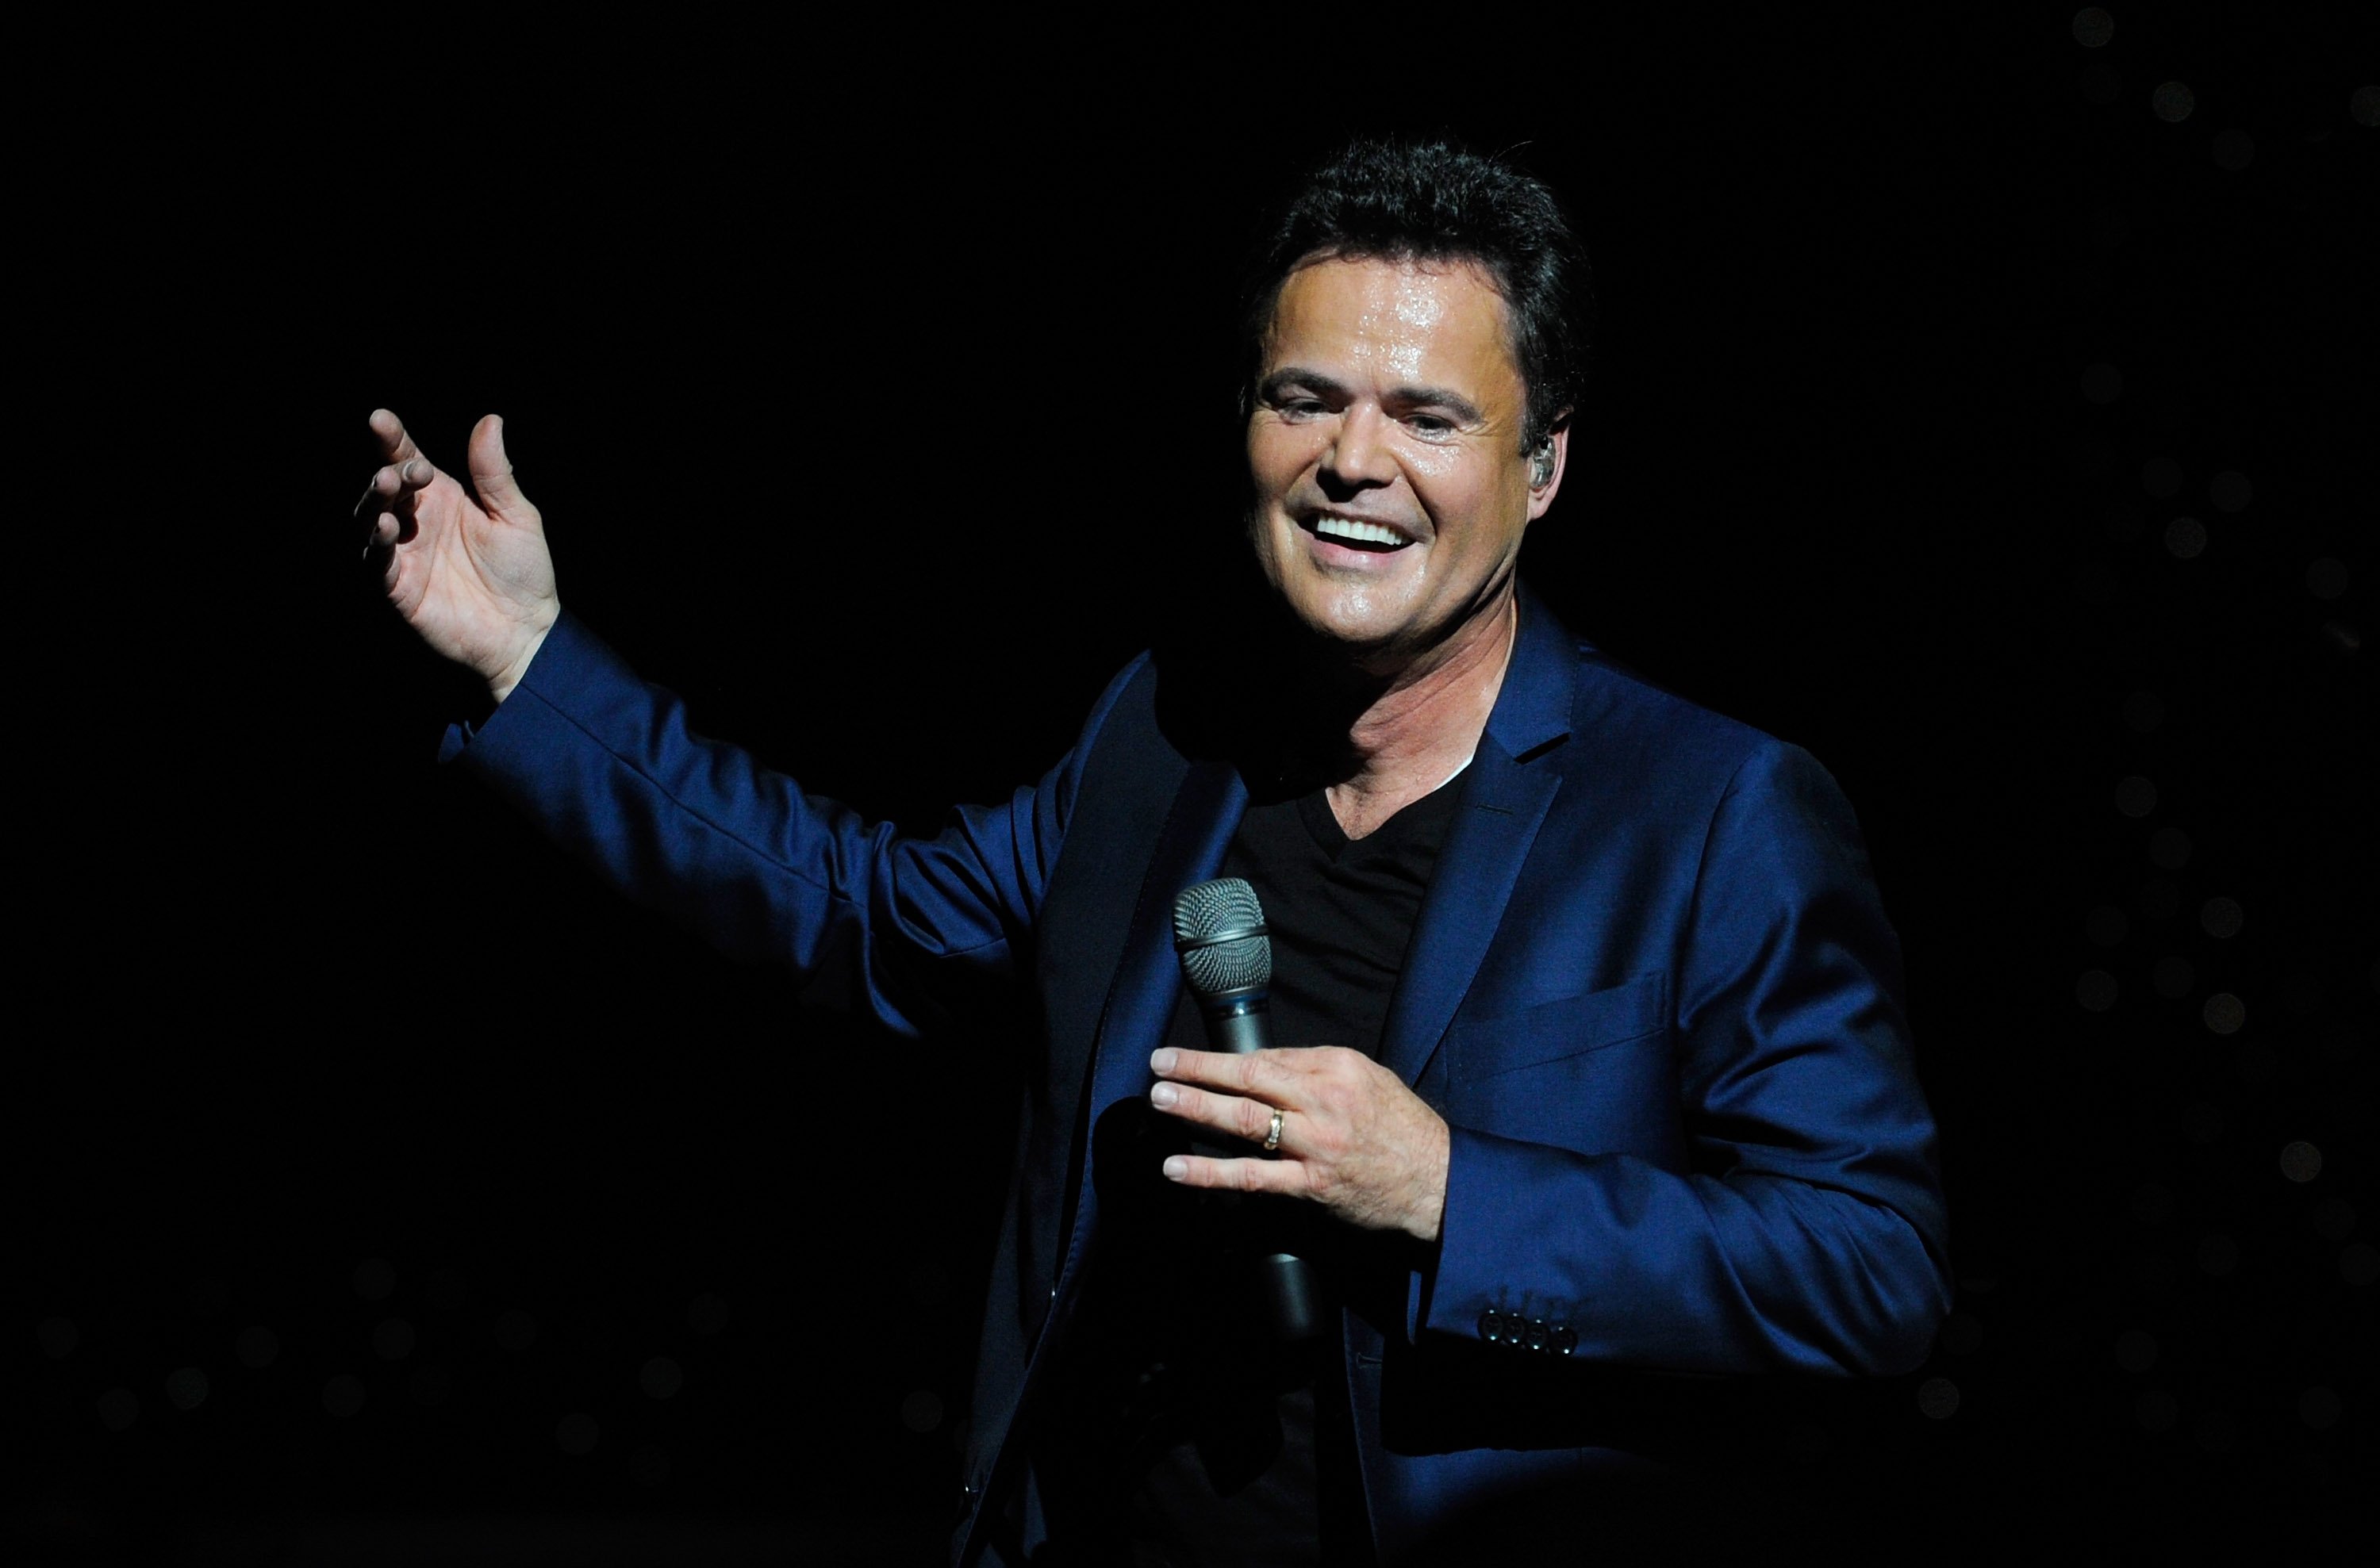 Donny Osmond during the Donny & Marie variety show at the Flamingo Las Vegas October 17, 2012  | Photo: GettyImages